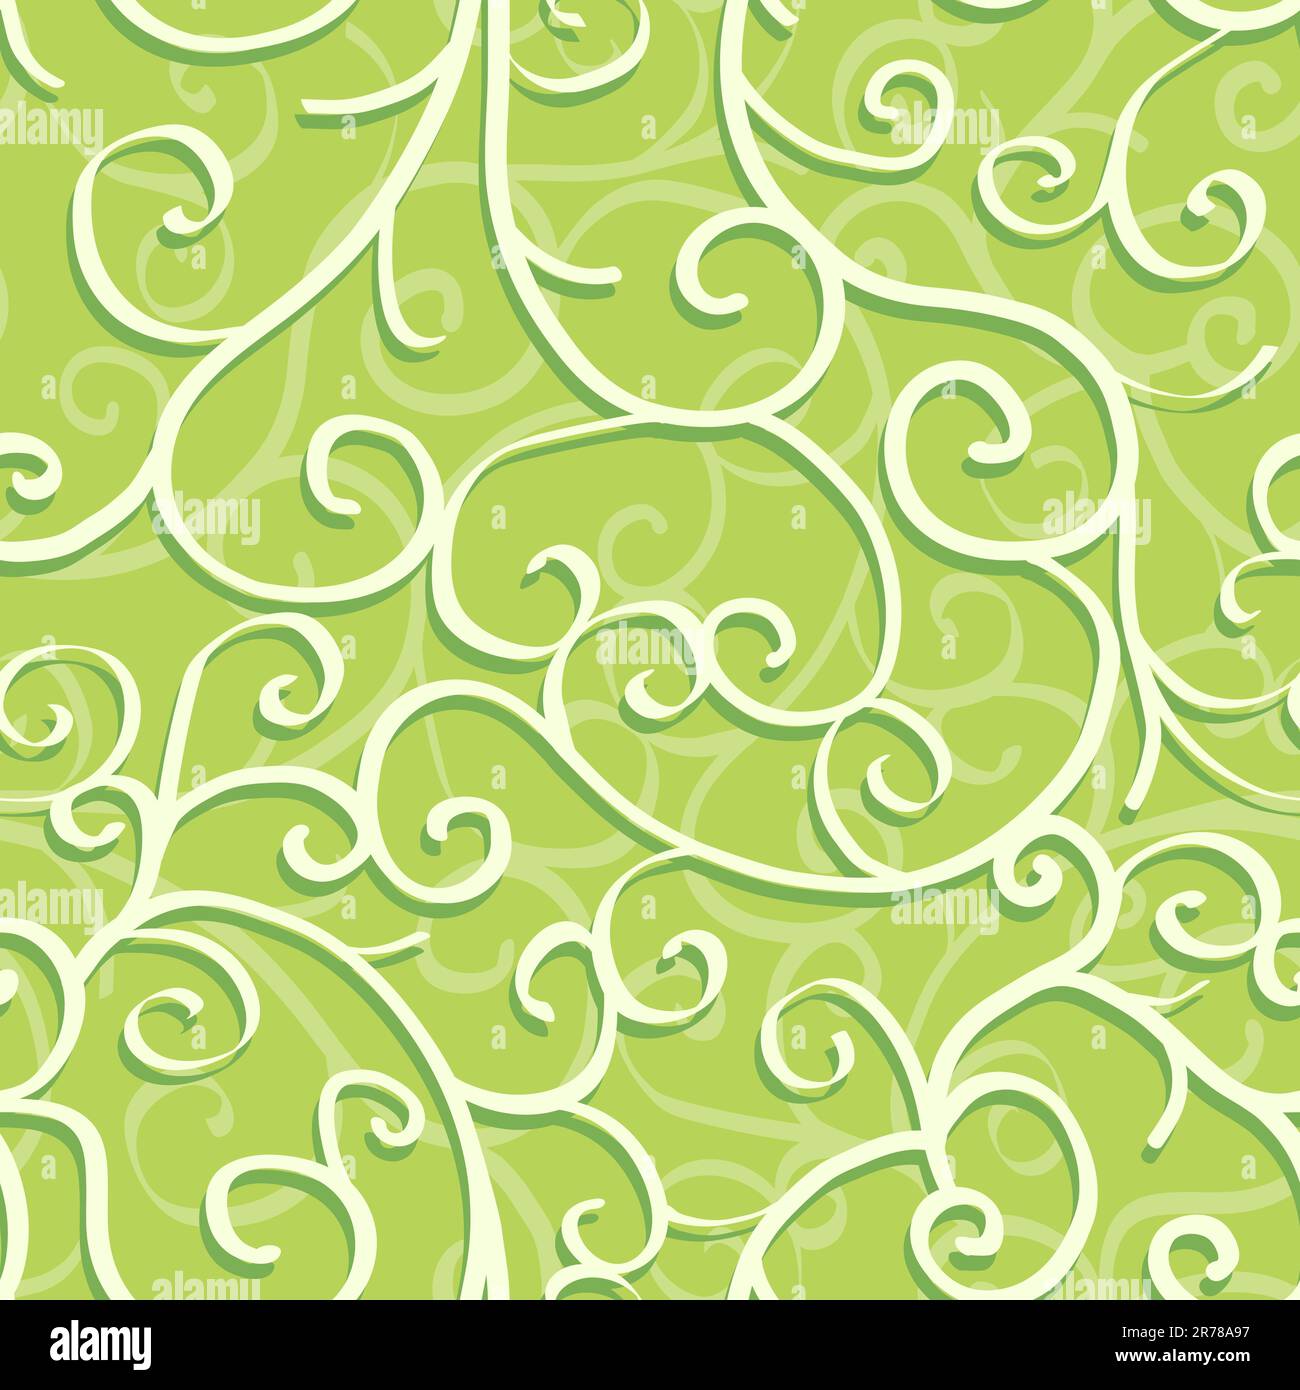 Seamless pattern with swirls over green background Stock Vector